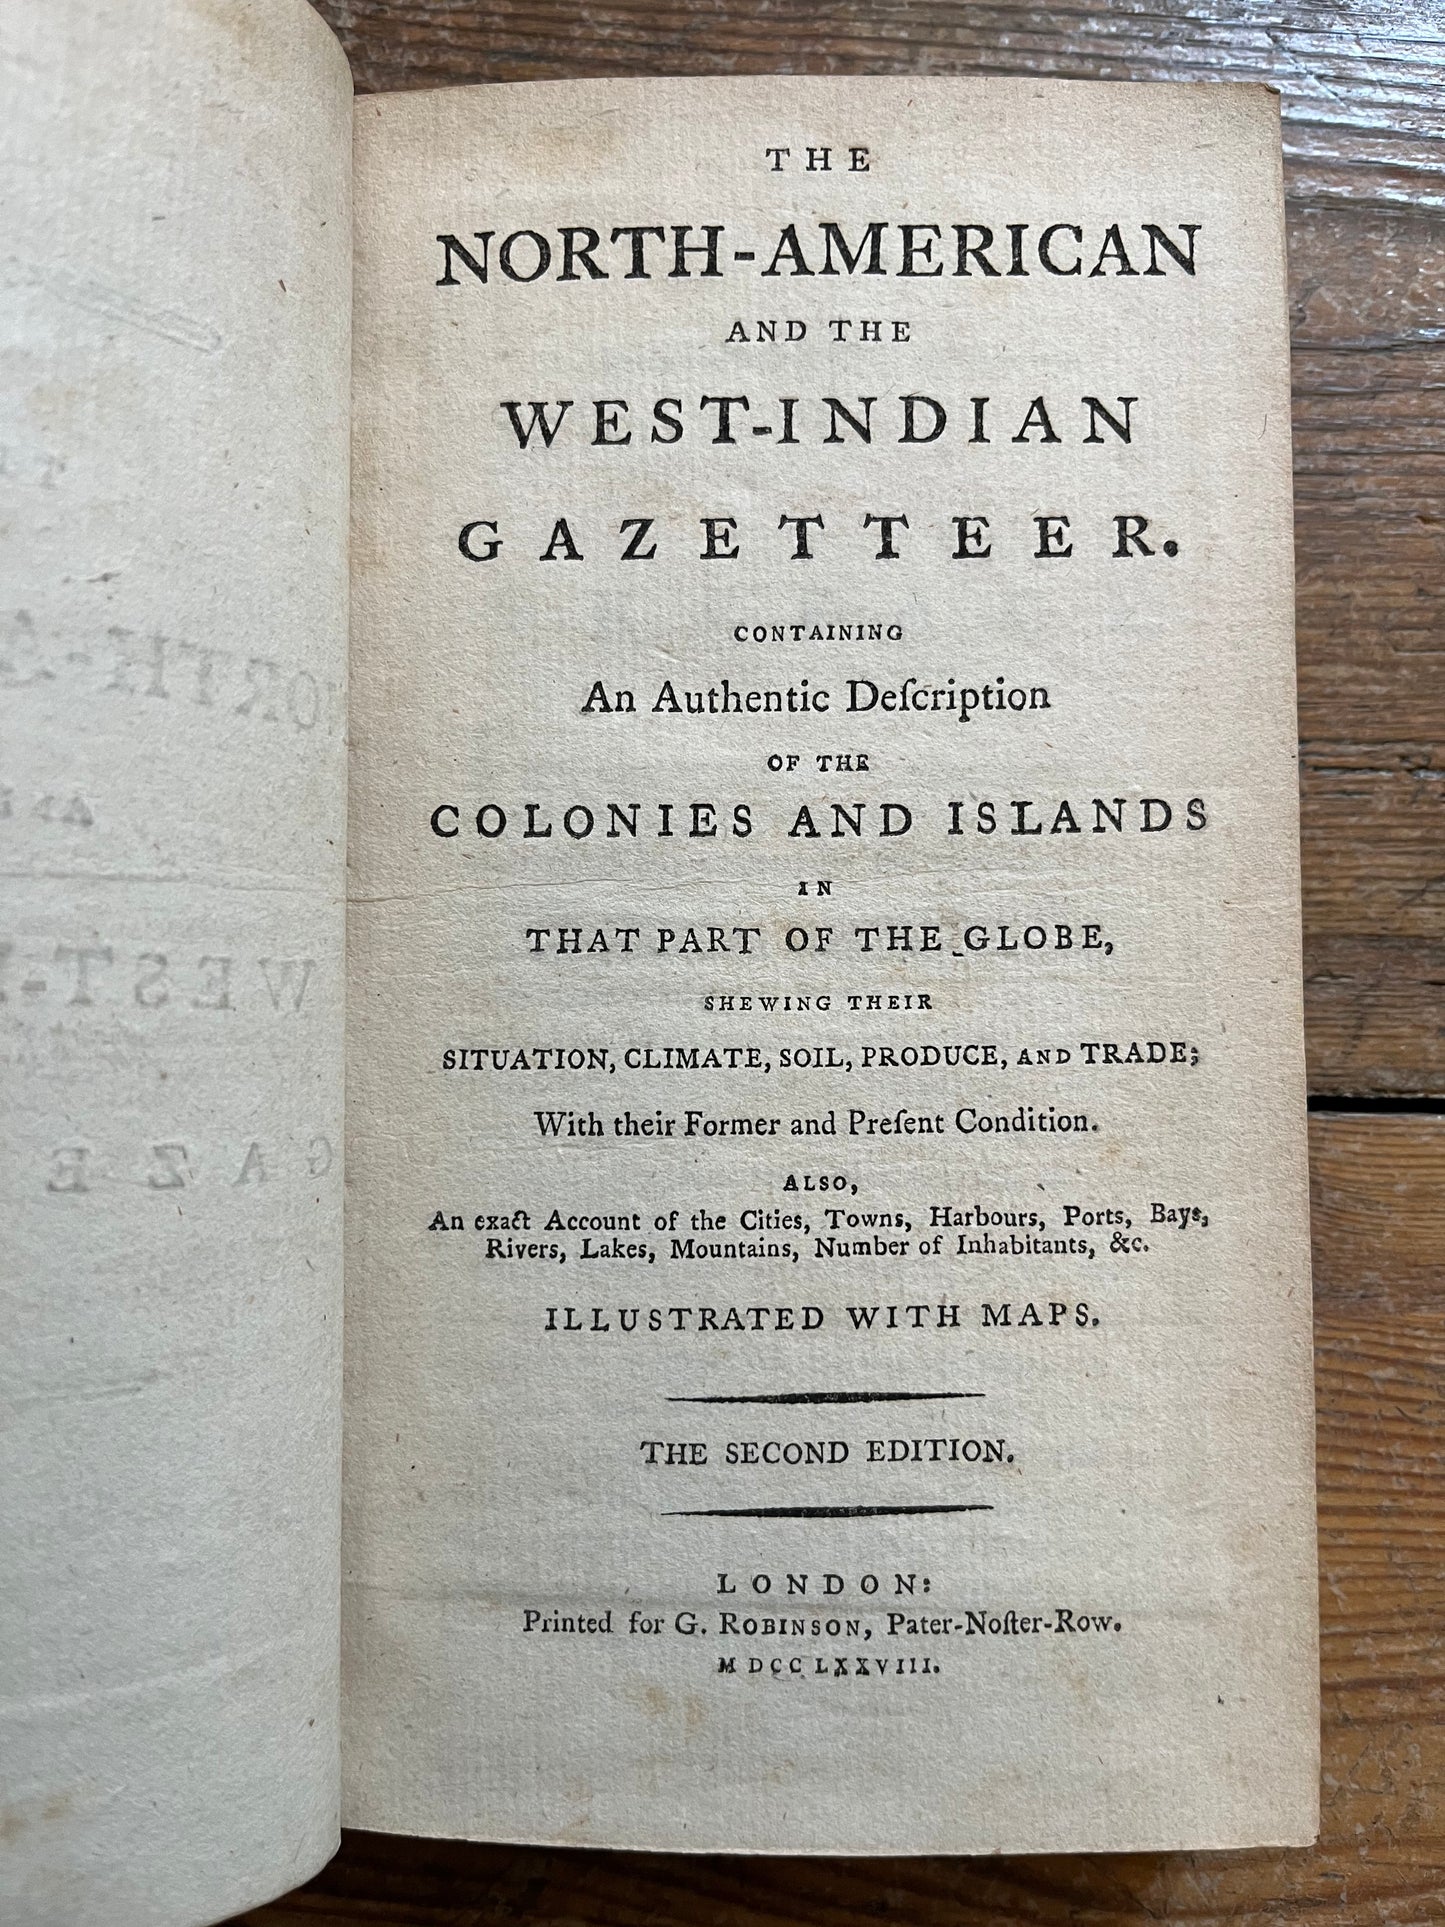 "THE NORTH-AMERICAN AND WEST-INDIAN GAZETTEER, CONTAINING AN AUTHENTIC DESCRIPTION OF THE COLONIES AND ISLANDS IN THAT PART OF THE GLOBE..."